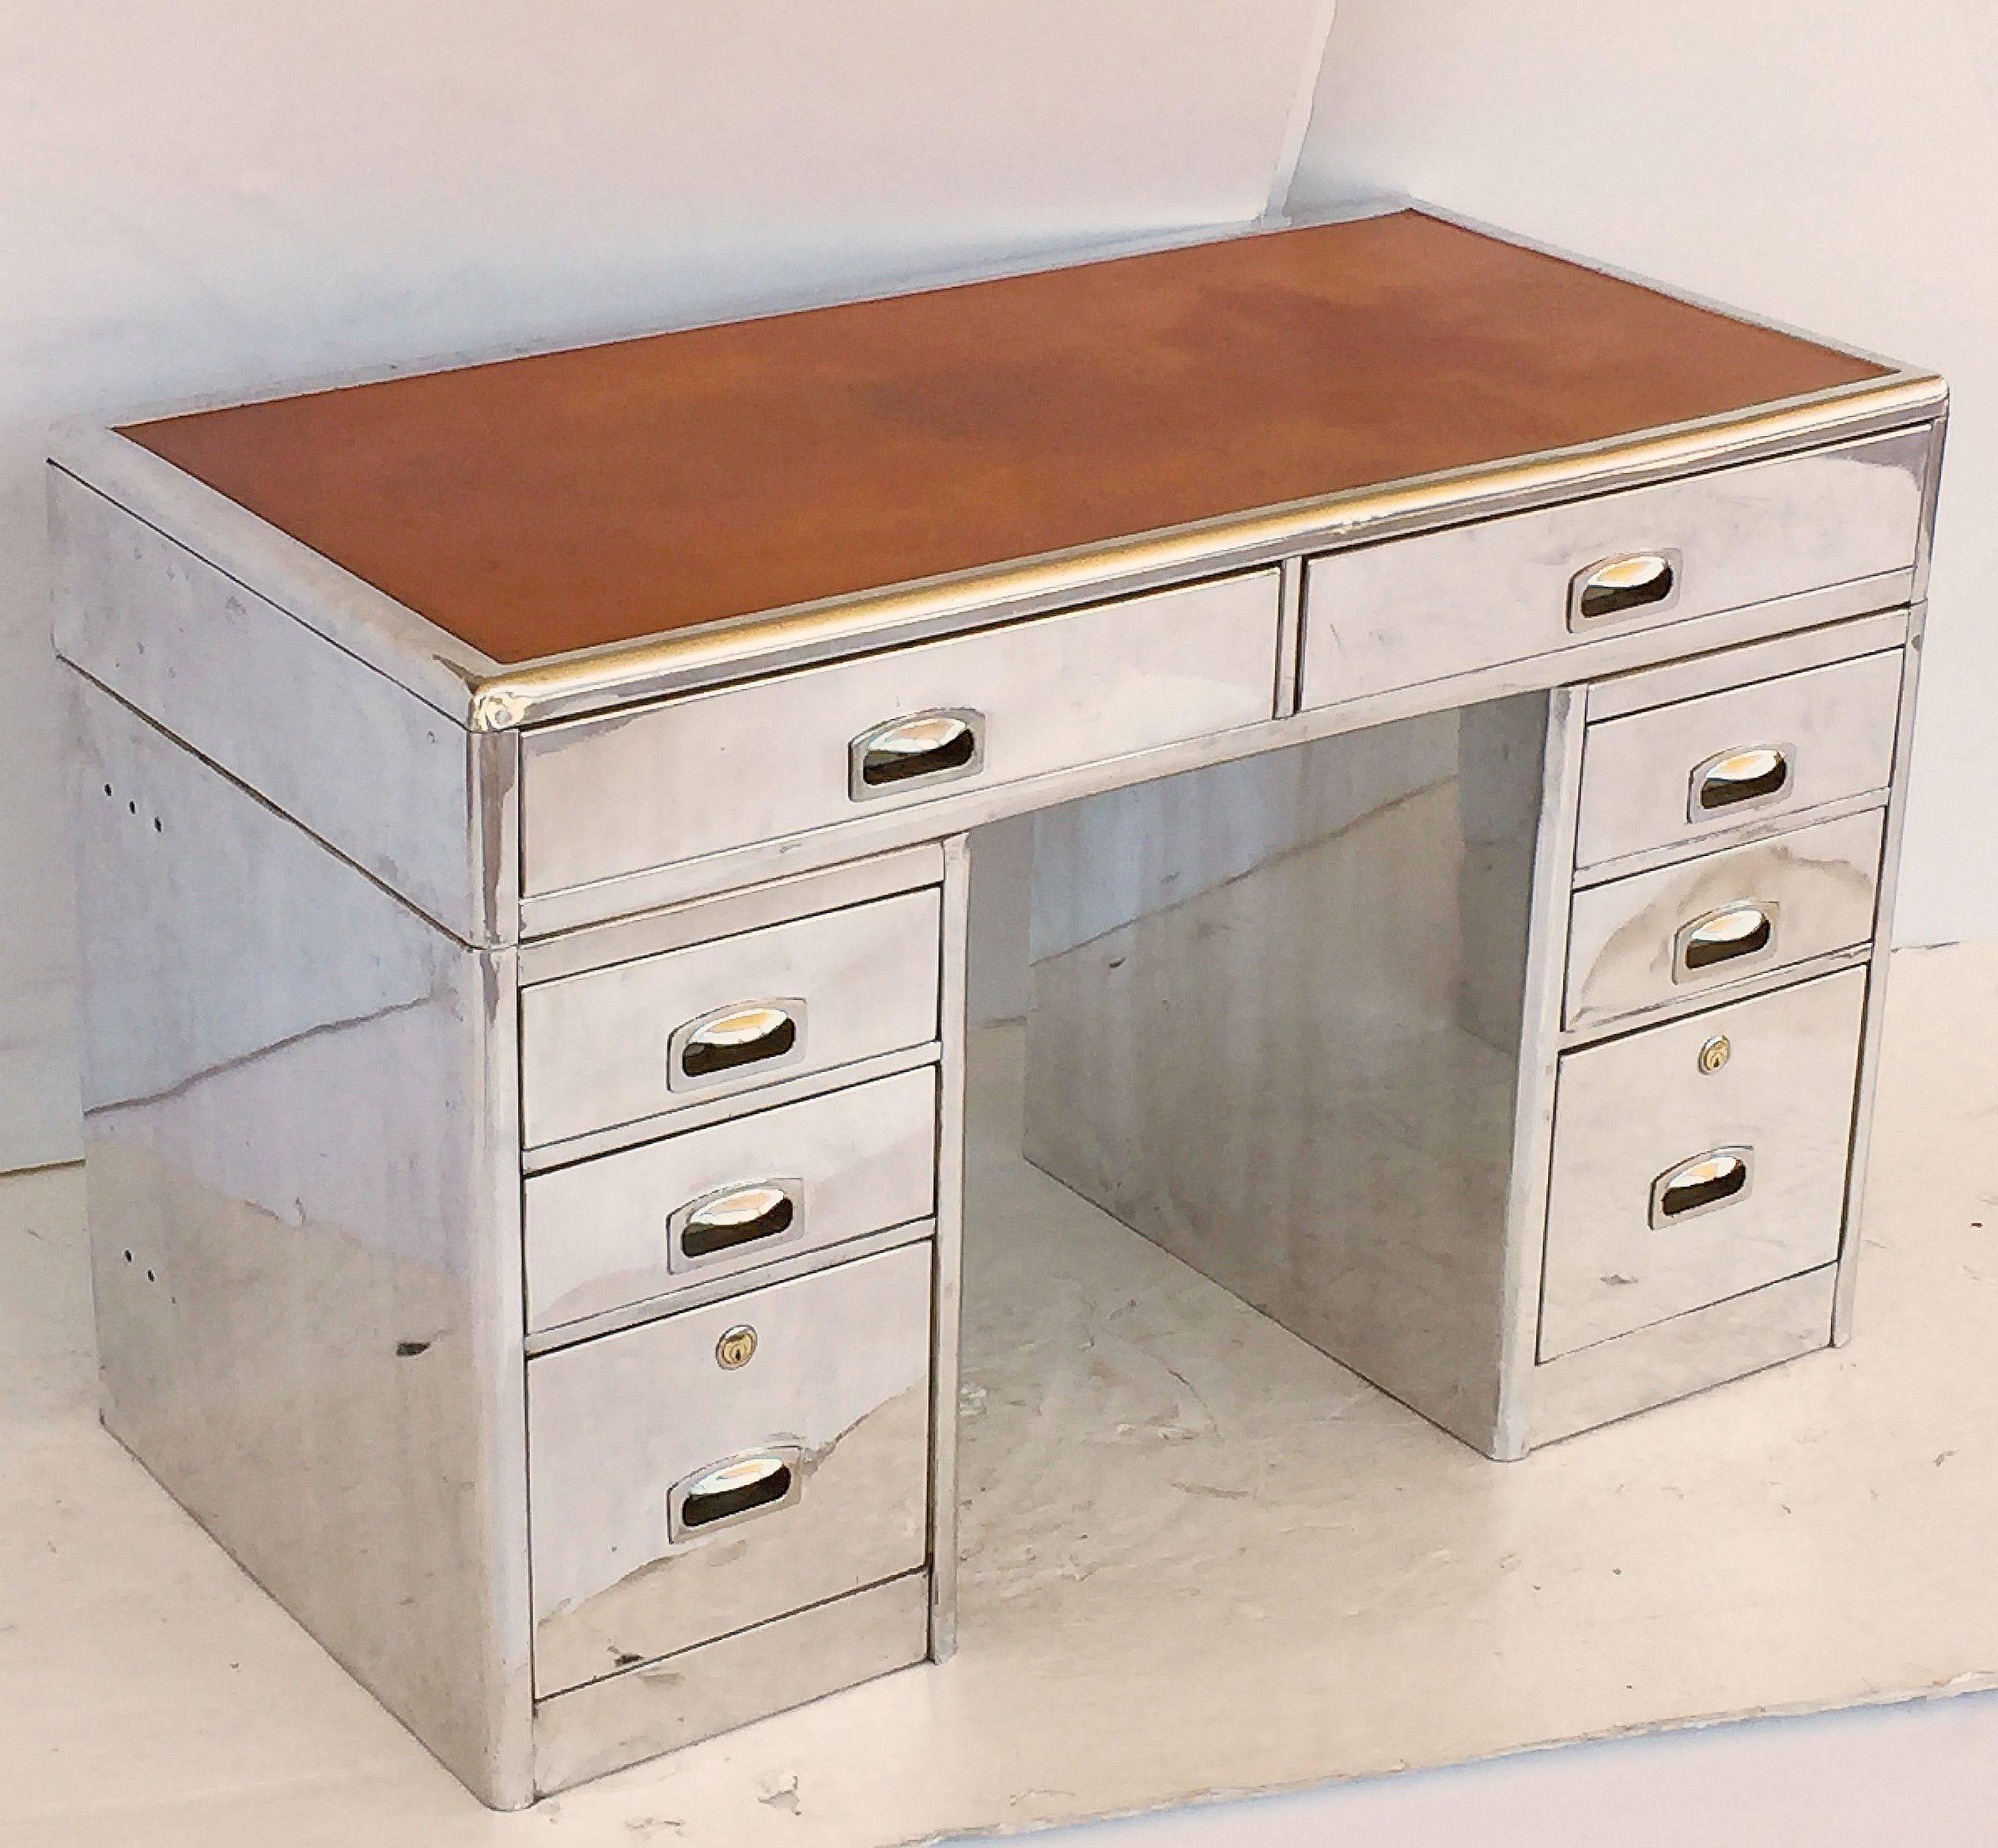 A handsome English mariner's or nautical yachtsman's pedestal desk of polished aluminium with leather top.
Featuring a rectangular top with embossed leather writing surface, rounded corners and top edge over a frieze of two metal drawers, each with